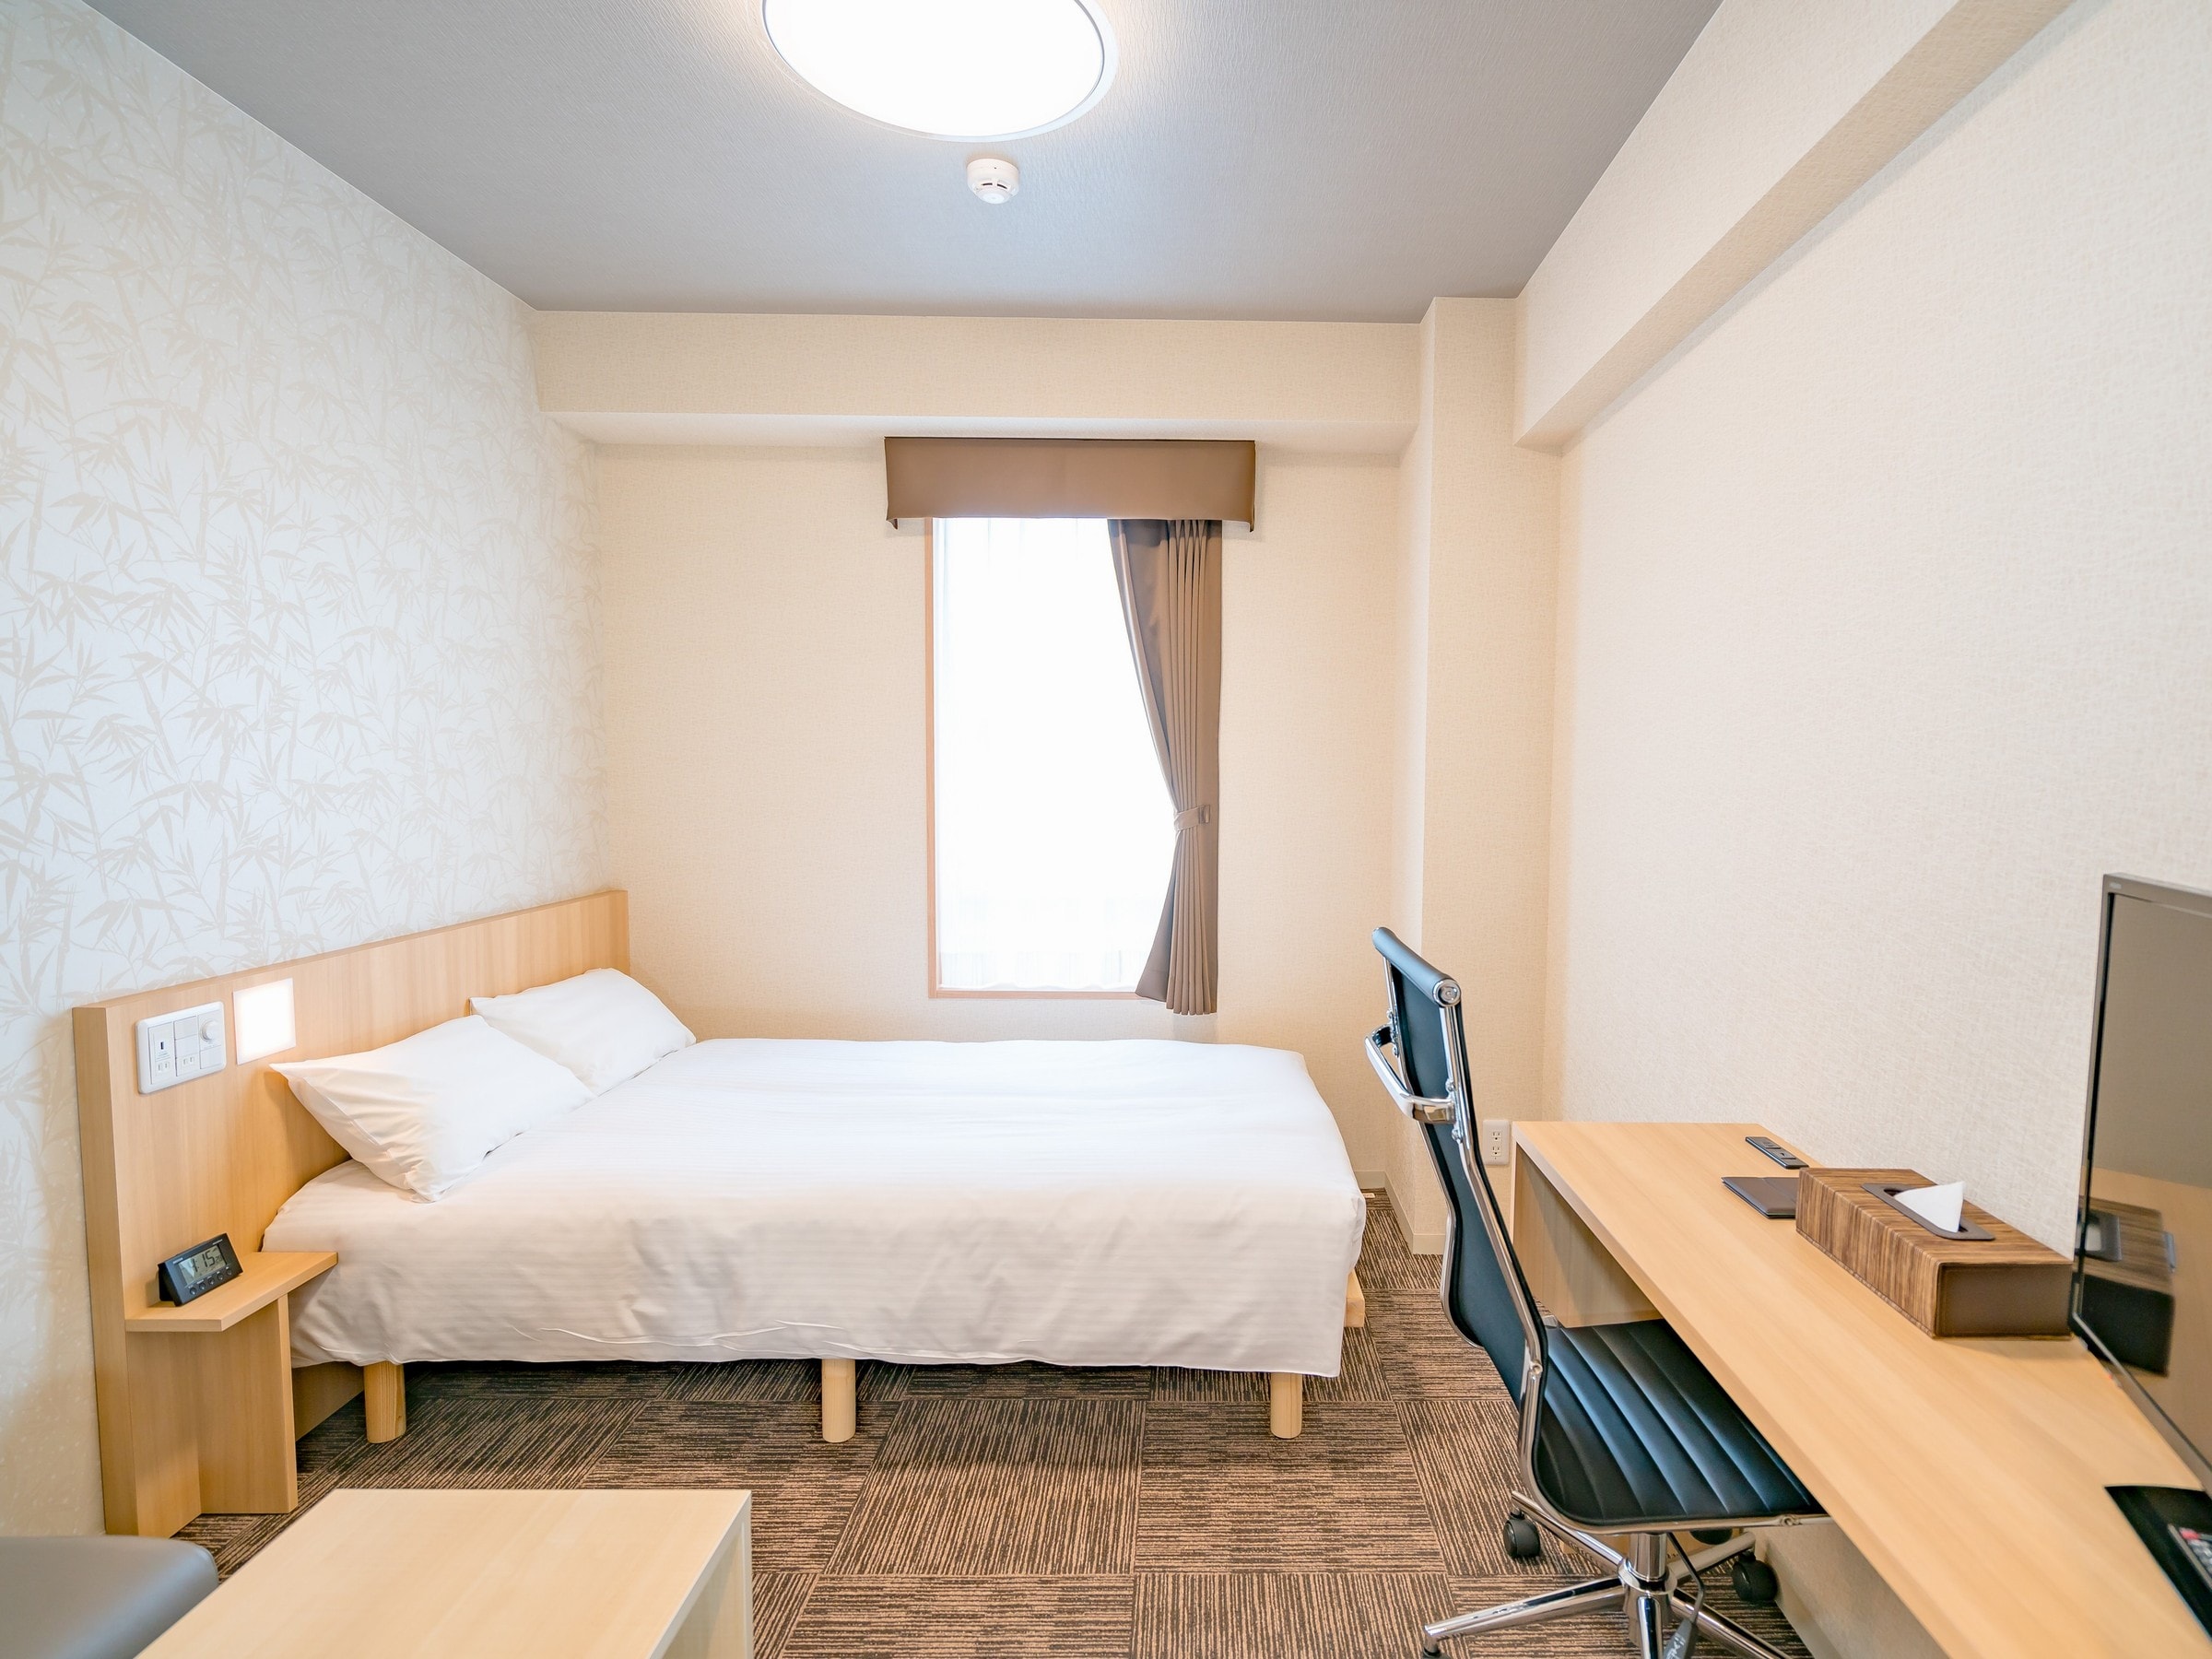 [Semi-double room with kitchen] This semi-double room is equipped with a kitchenette and is suitable for long-term stays.